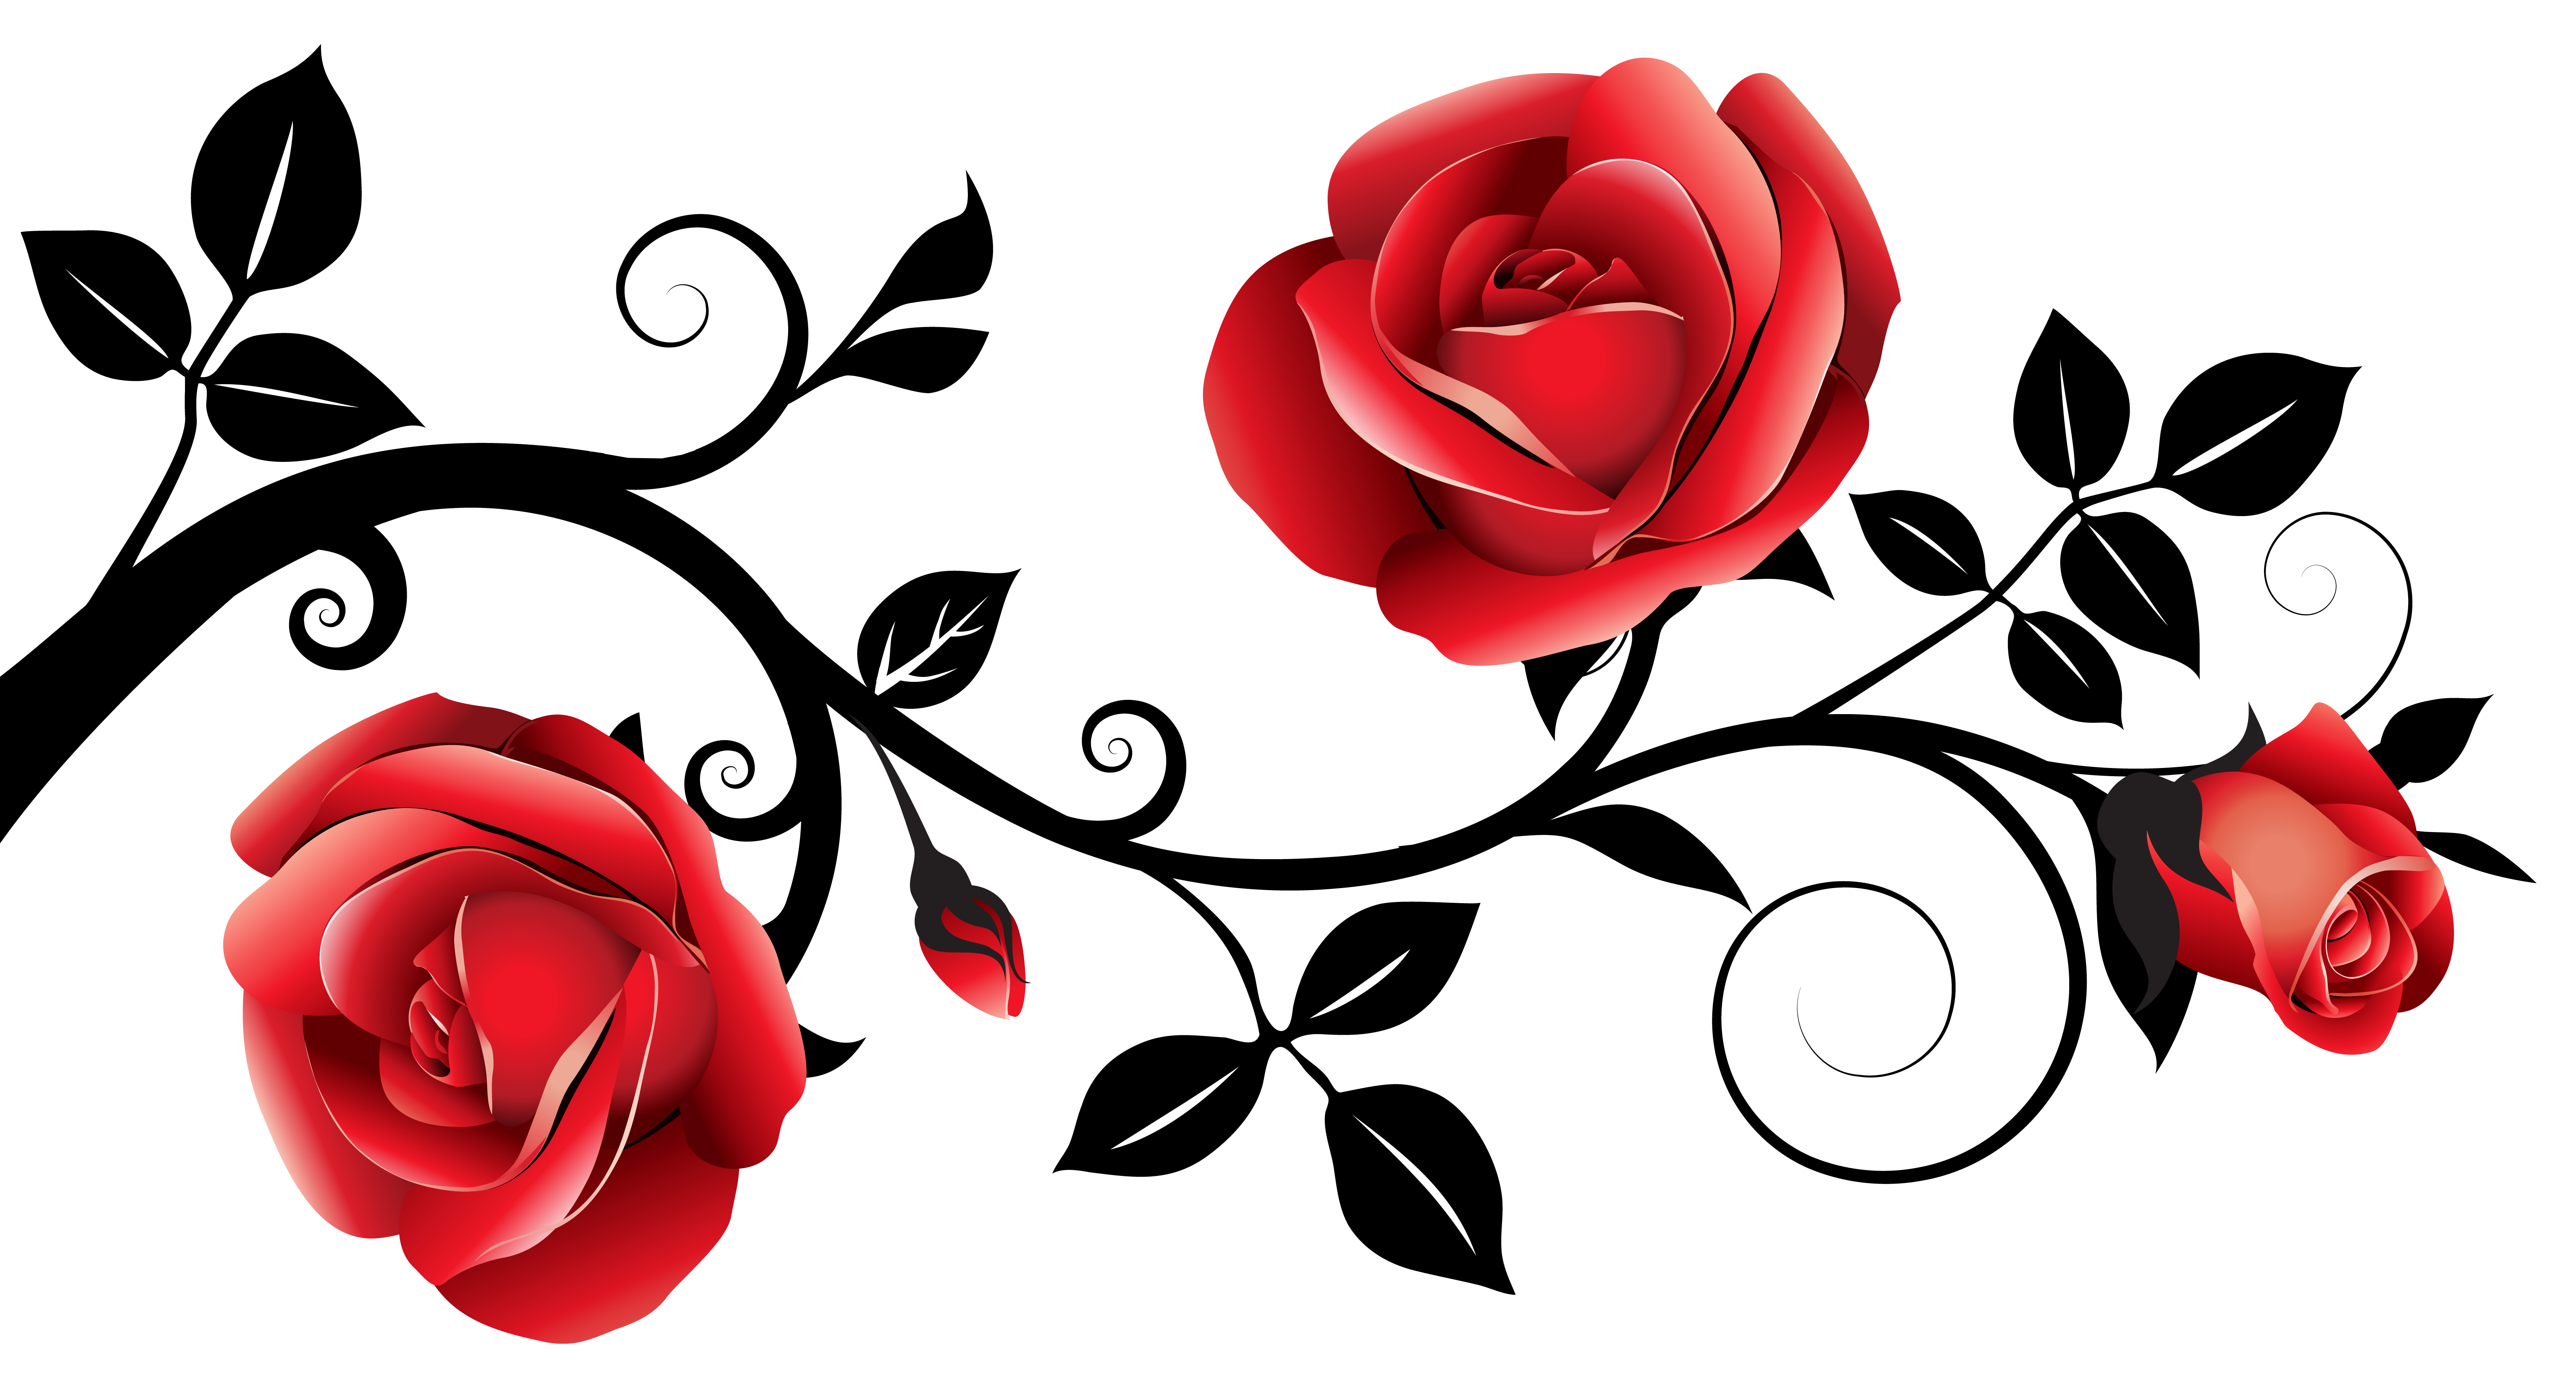 Red and black decorative. Clipart design rose